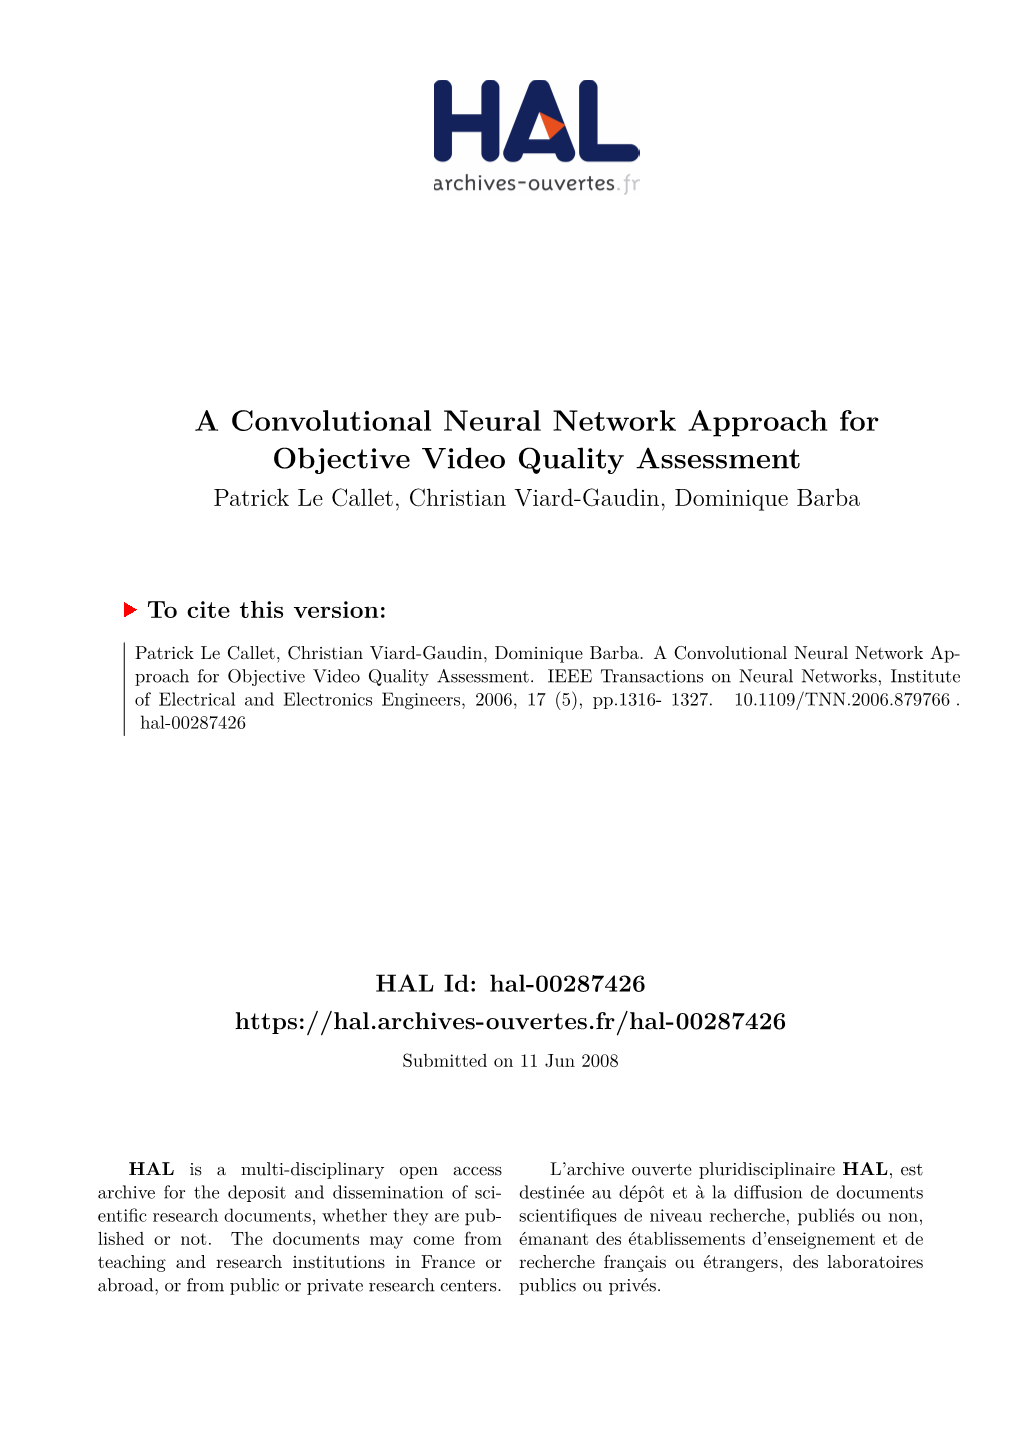 A Convolutional Neural Network Approach for Objective Video Quality Assessment Patrick Le Callet, Christian Viard-Gaudin, Dominique Barba